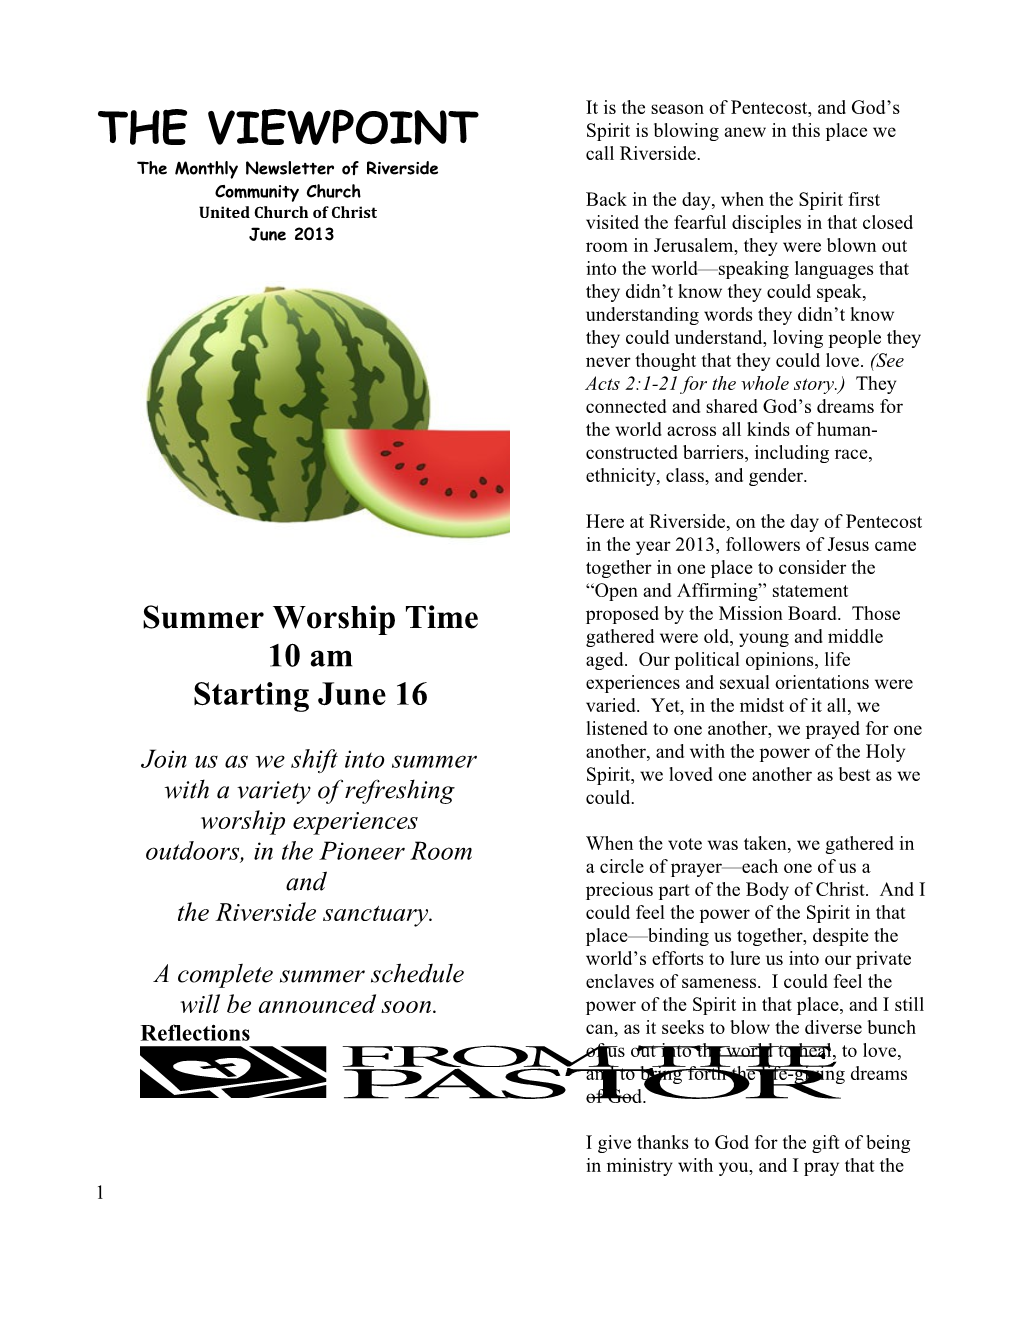 The Monthly Newsletter of Riverside Community Church